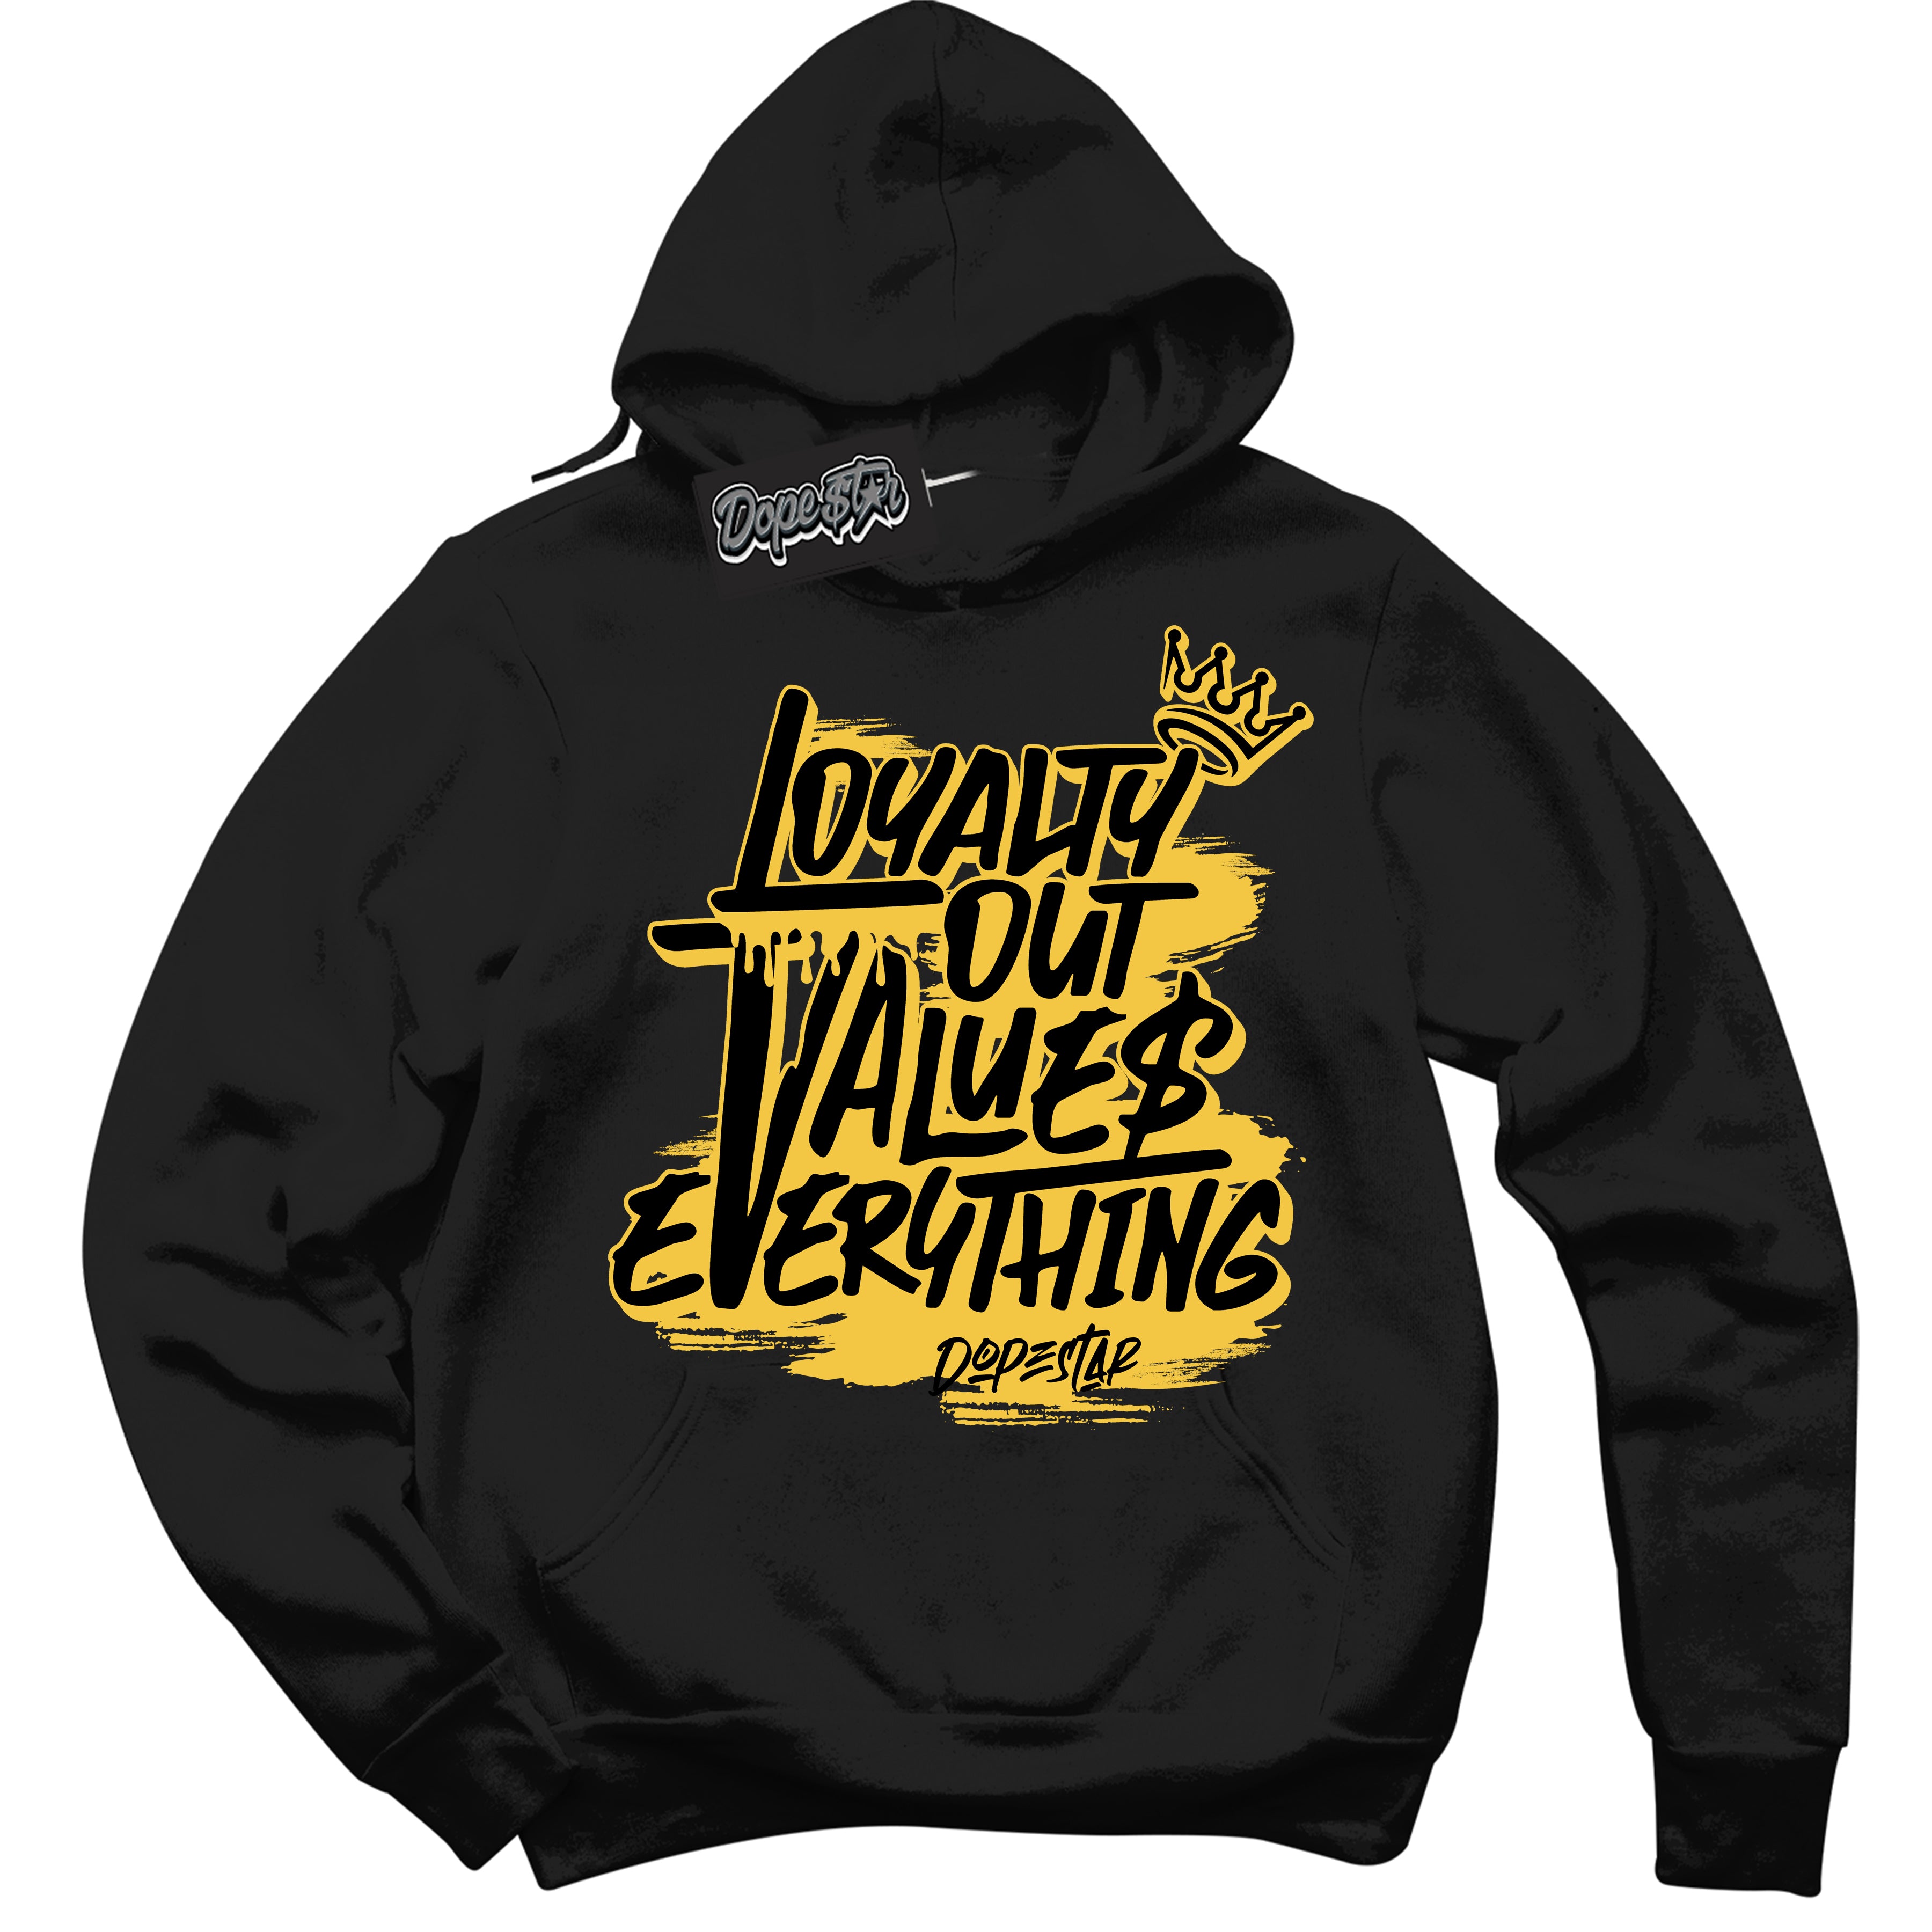 Cool Black Hoodie with “ Loyalty Out Values Everything ”  design that Perfectly Matches  Thunder 4s Sneakers.